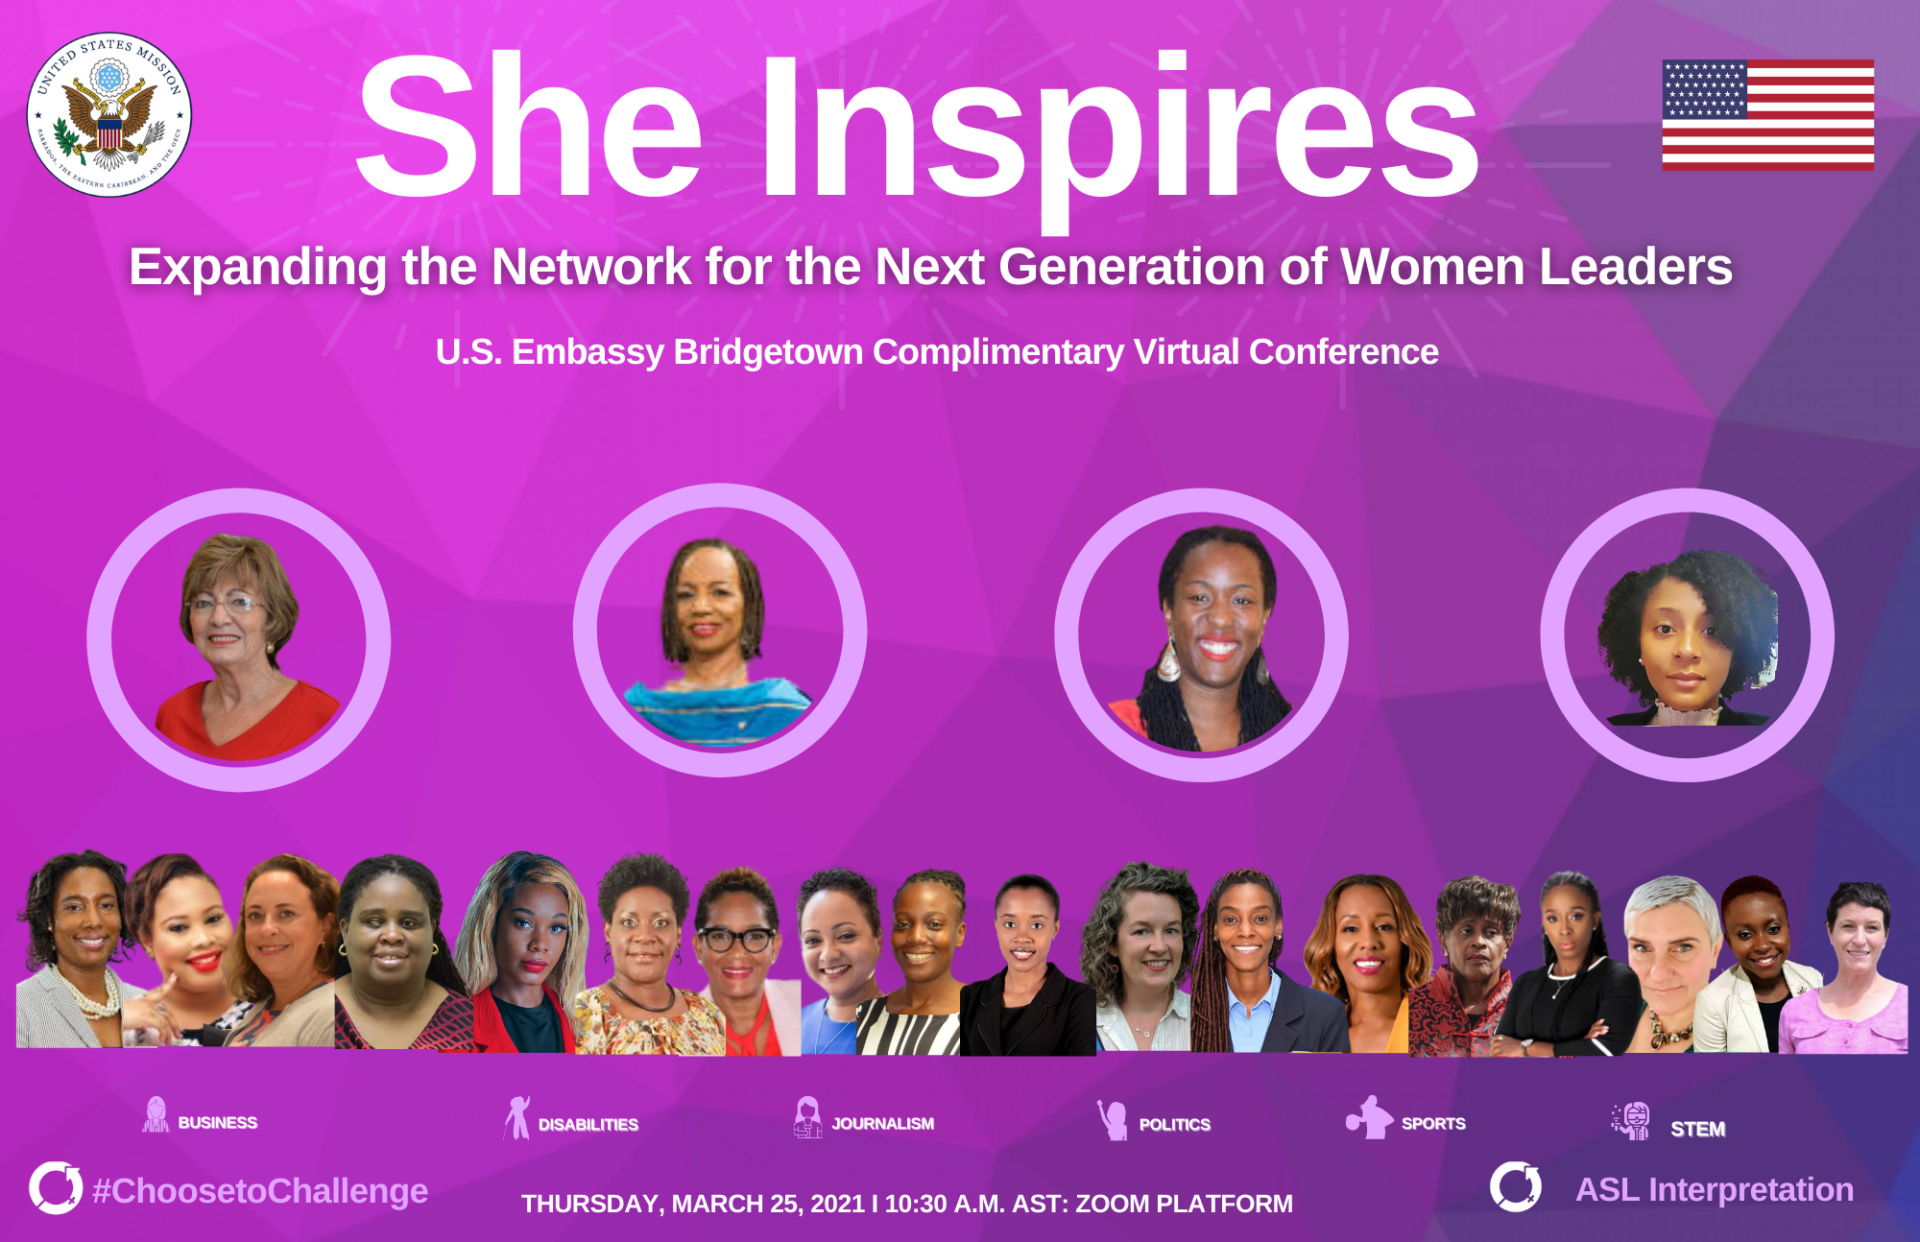 “She Inspires” Women’s History Month event expands the networks of the next generation of Eastern Caribbean female leaders